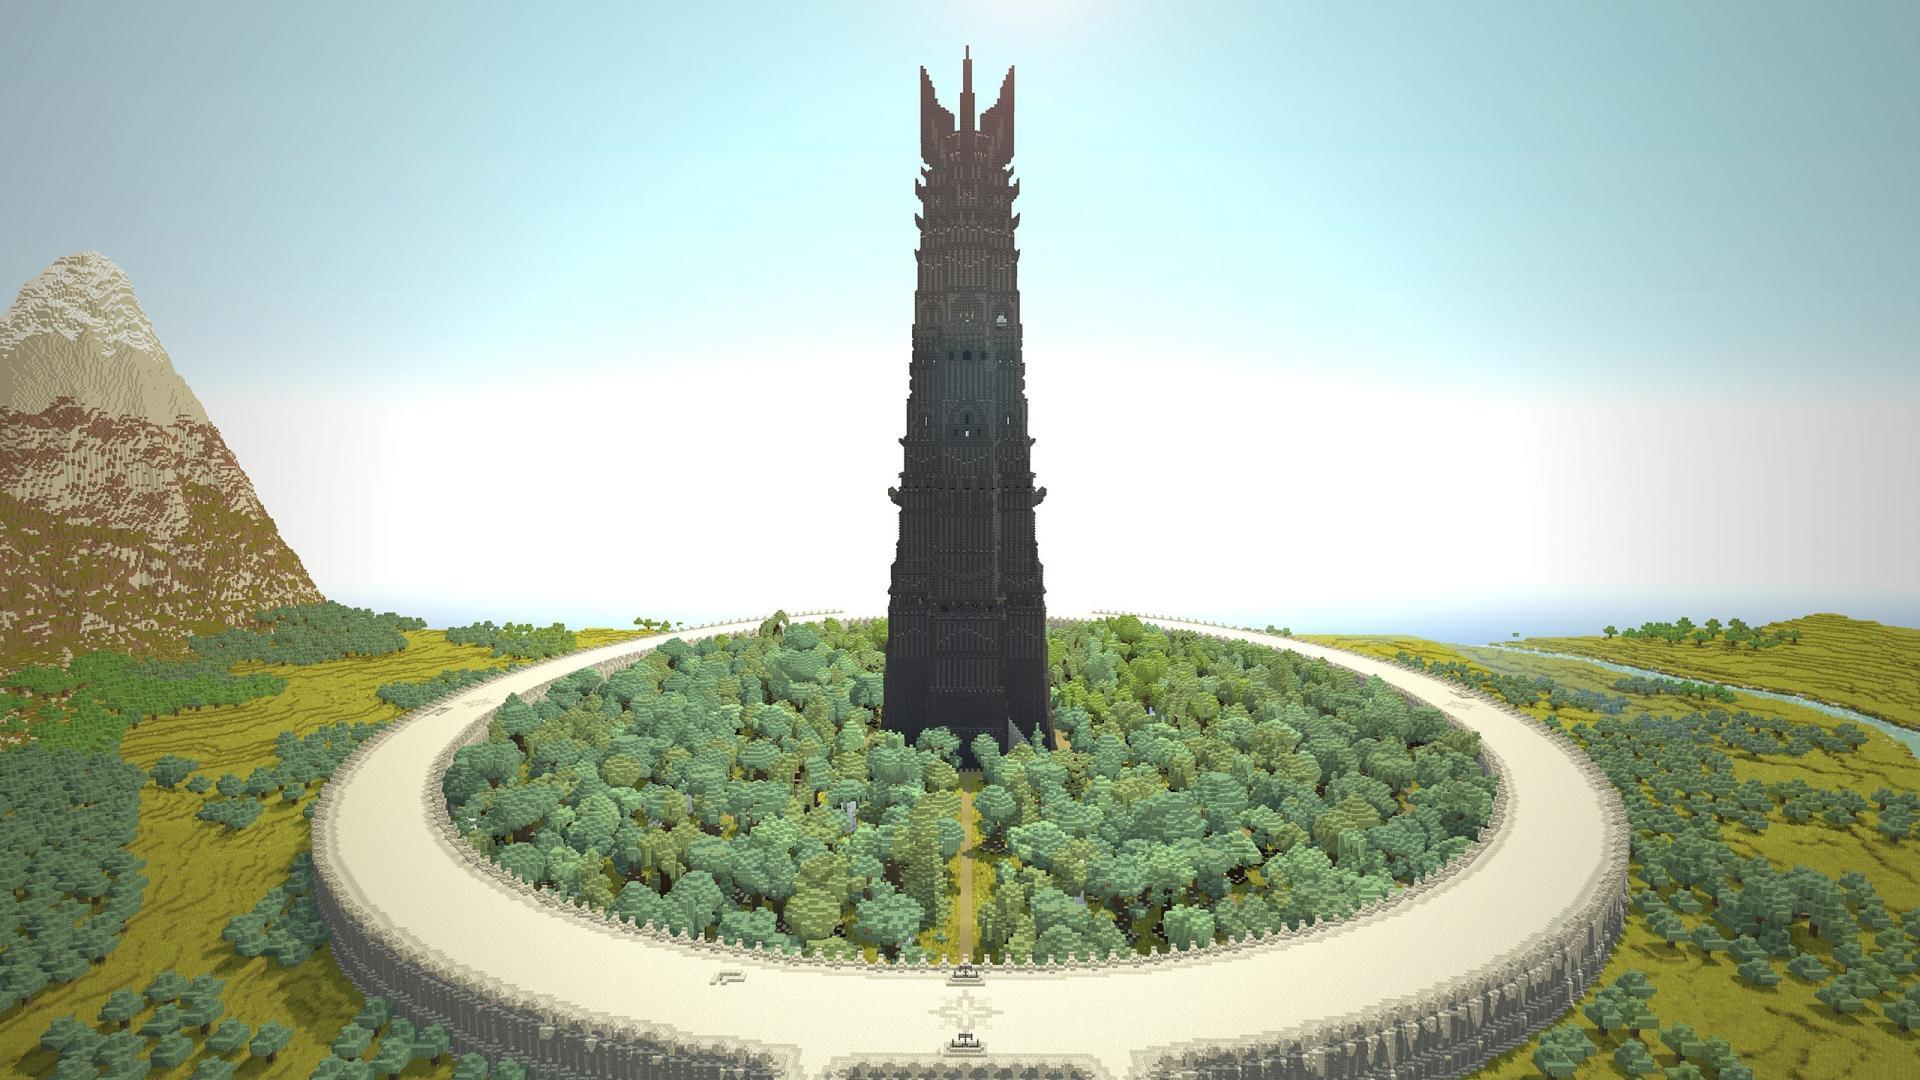 The lord of rings minecraft orthanc isengard wallpapers.